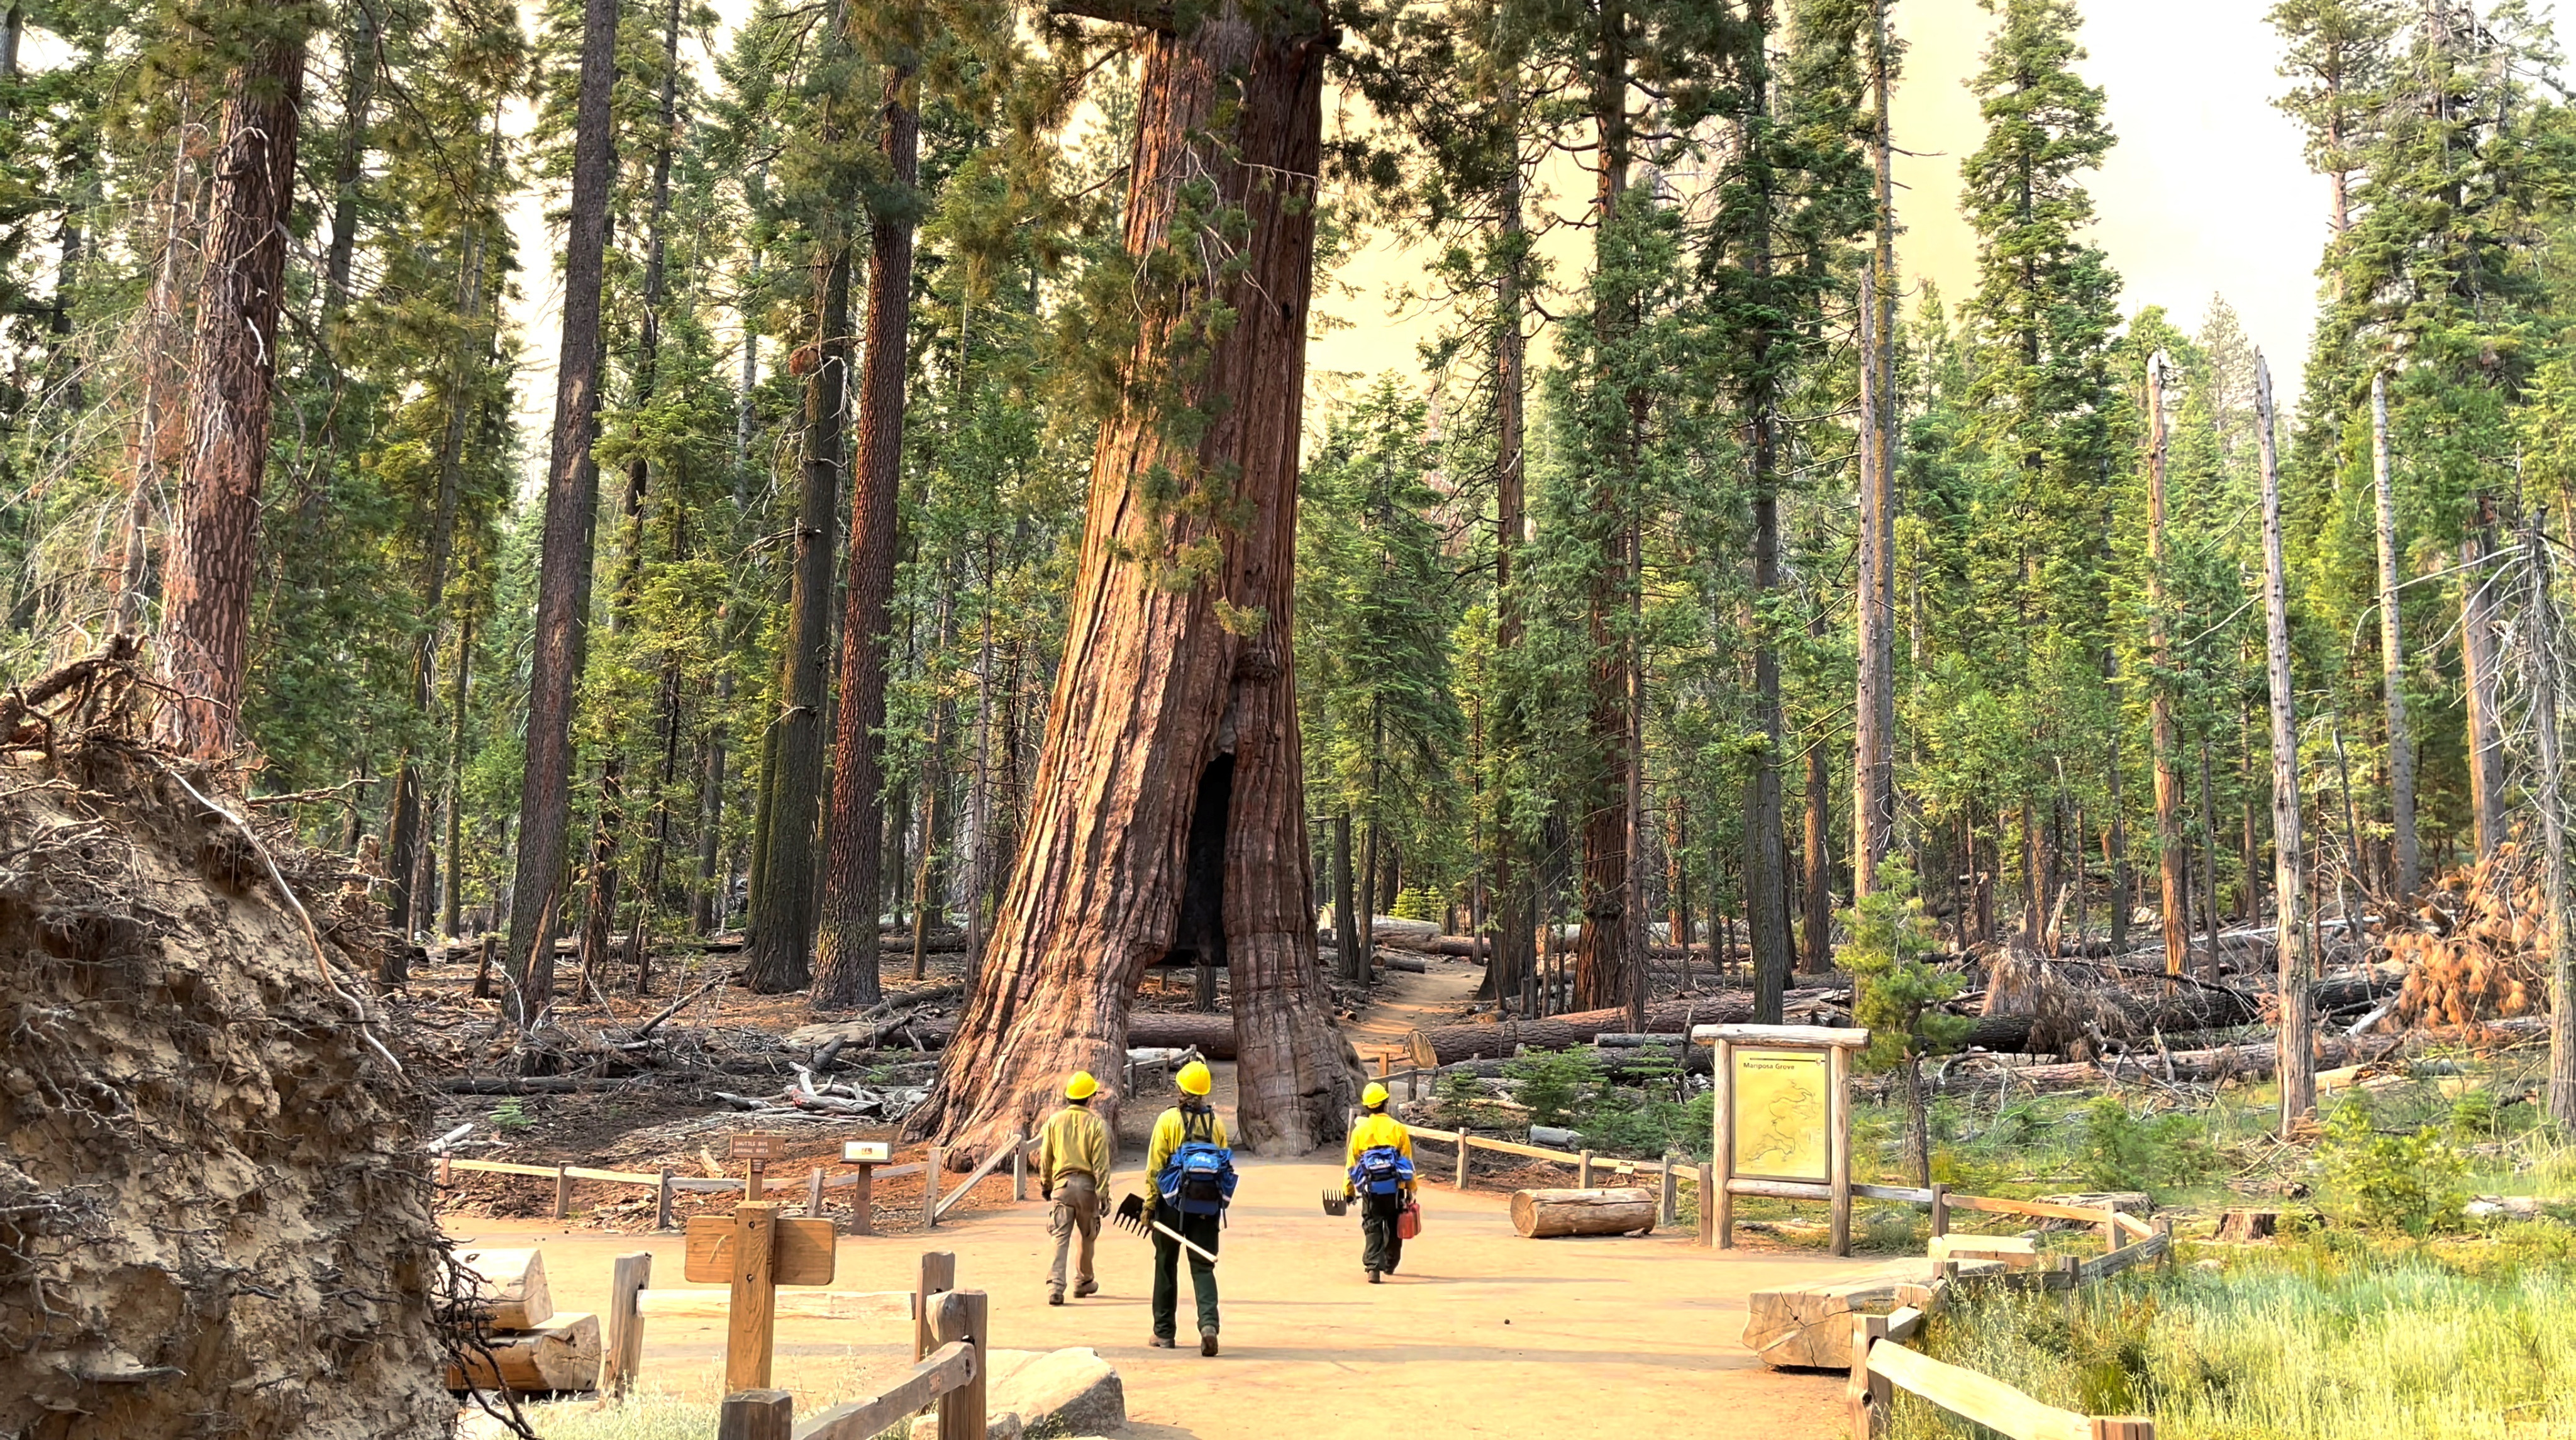 Workers walk to prepare the area to protect it, as Washburn Fire continues to burn in the area, in Yosemite National Park's Mariposa Grove